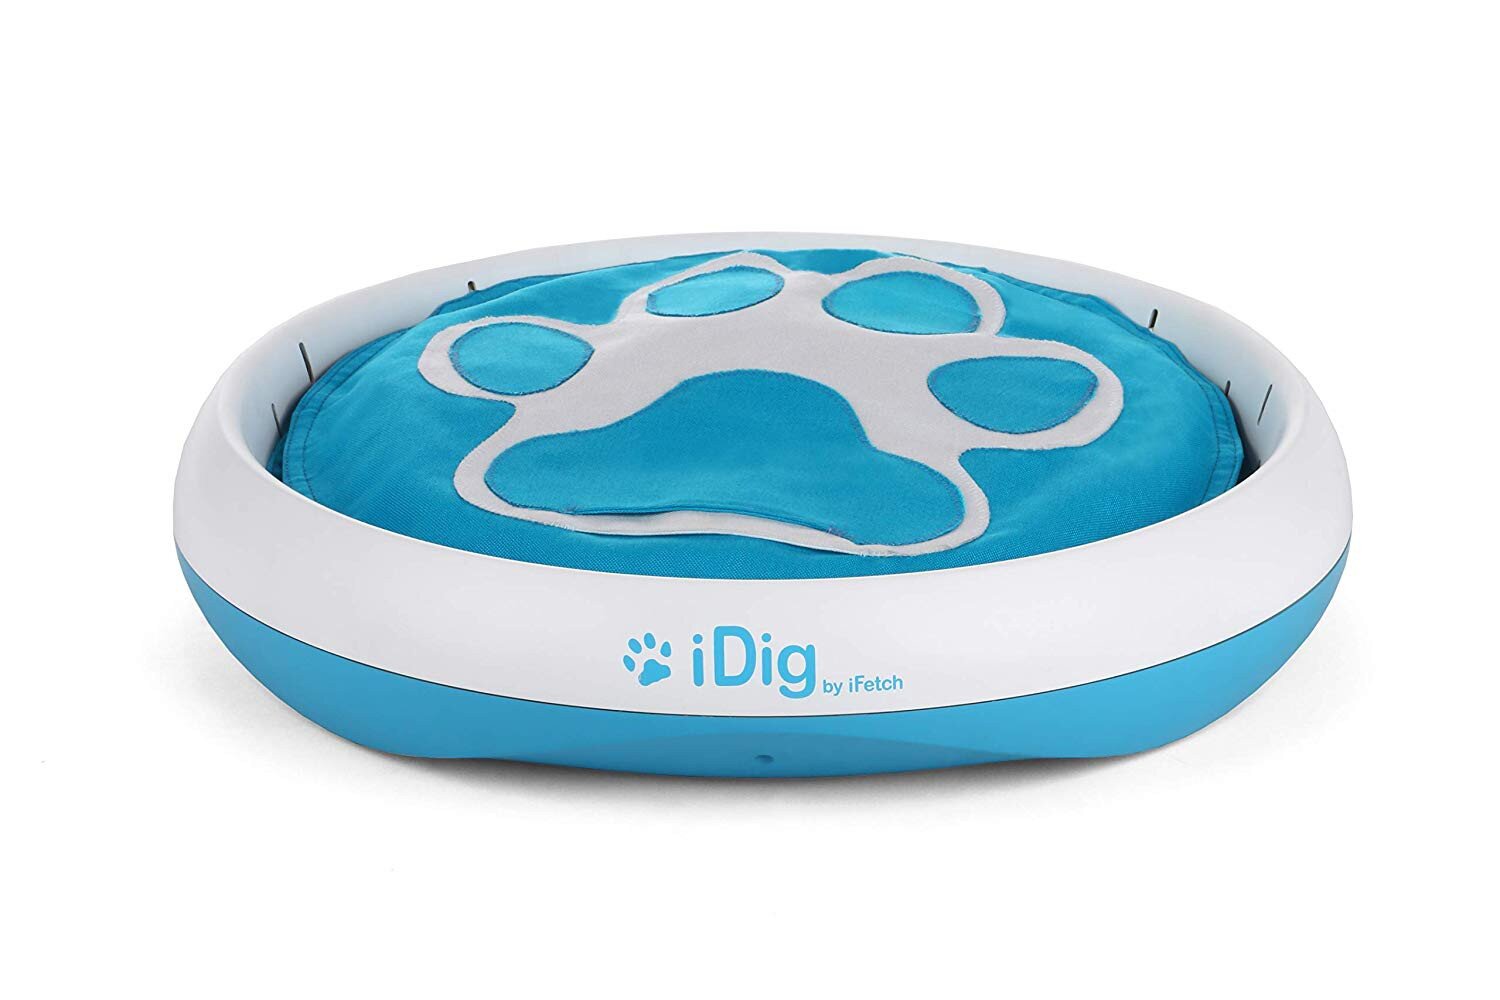 iDig Go Digging Toy for Dogs From iFetch - New Opened Box - Never